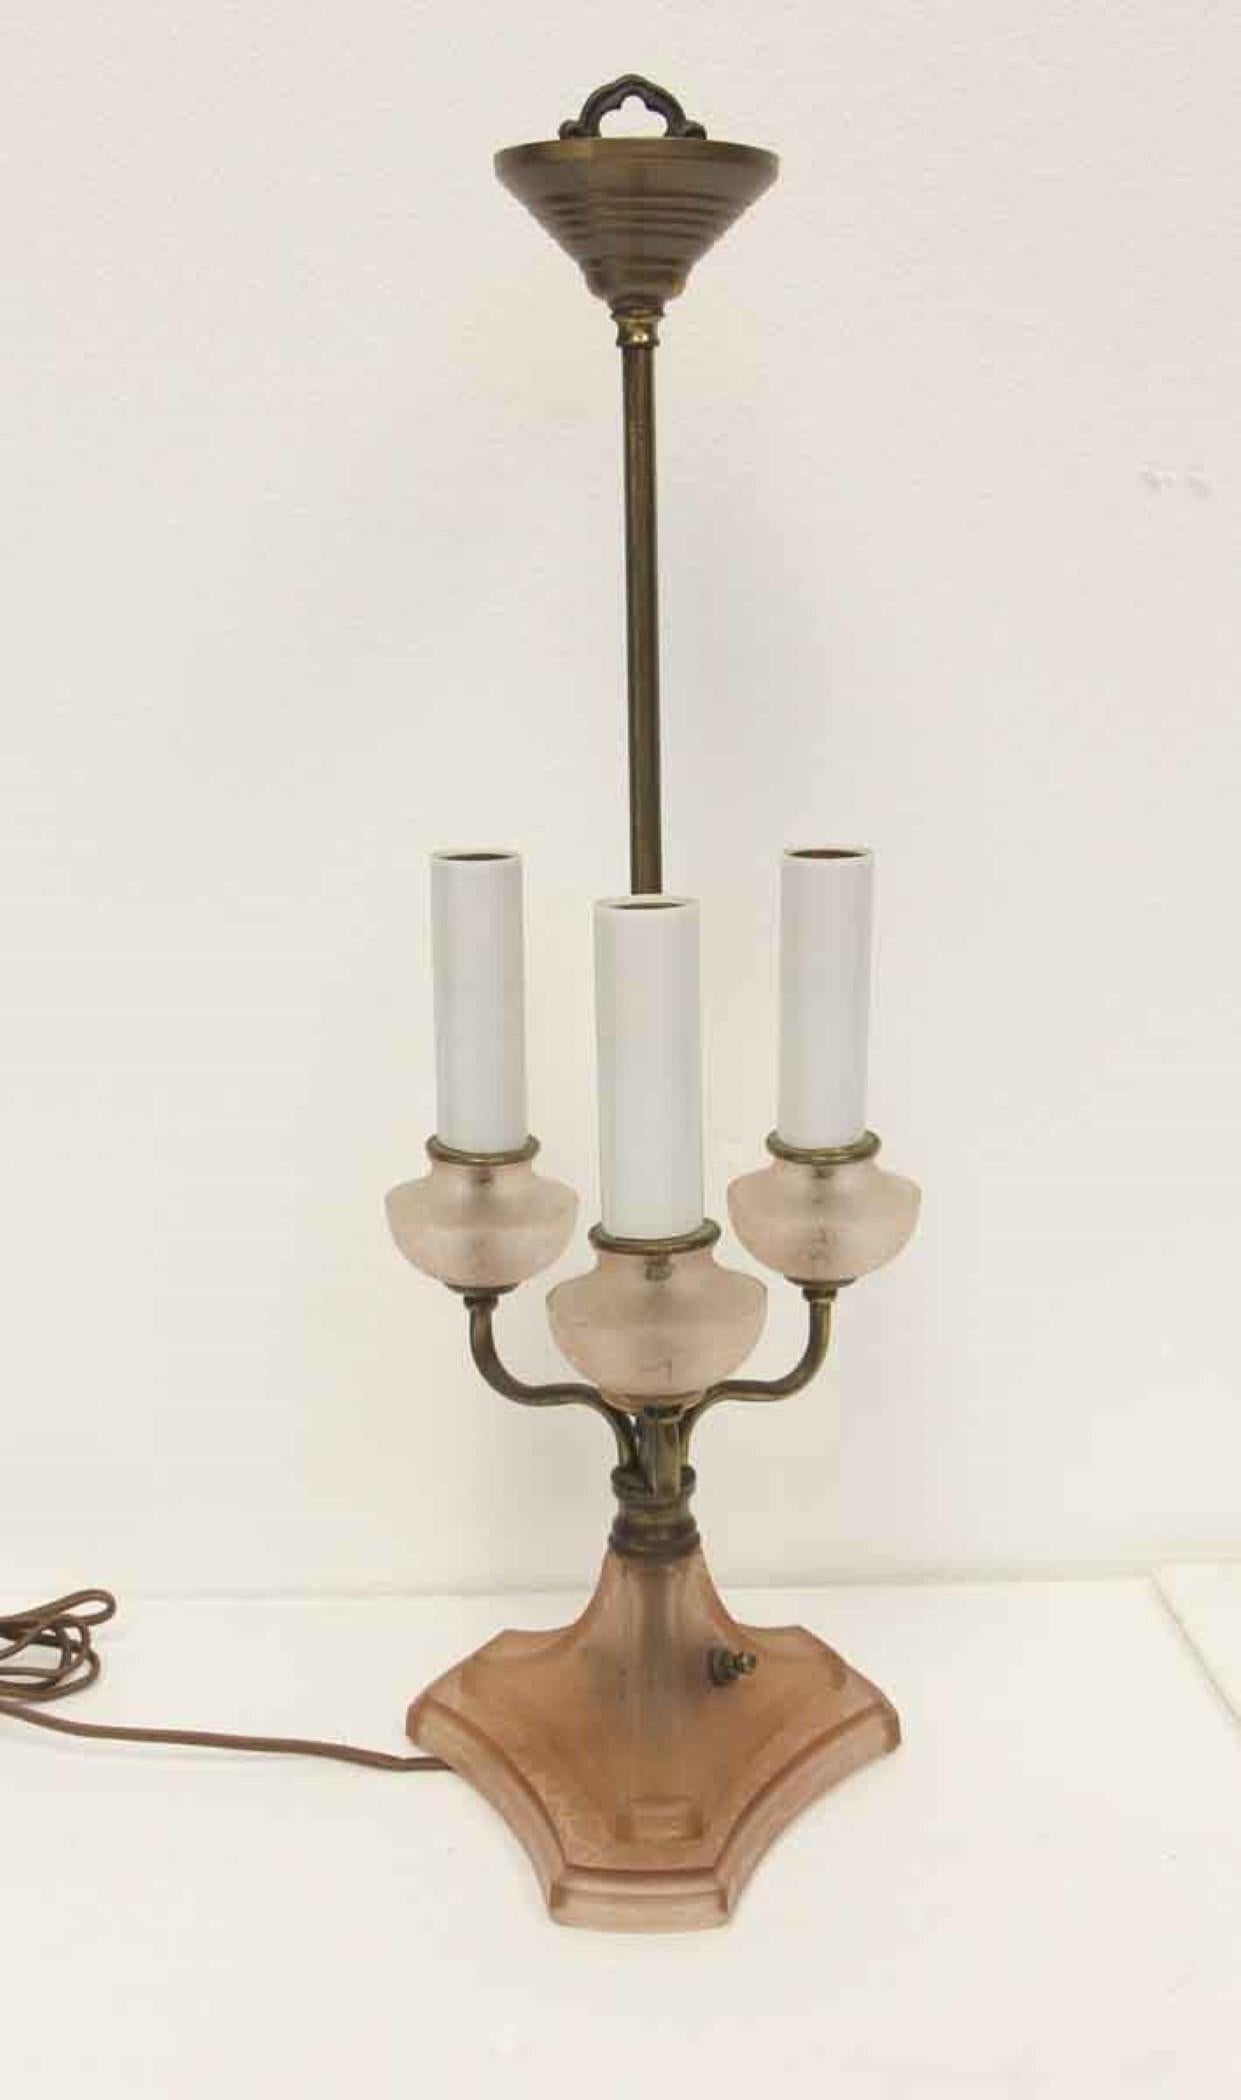 1900s Victorian transparent pink cast glass table lamp featuring a crackled surface and three candlestick arm lights. Please note, this item is located in our Scranton, PA location.